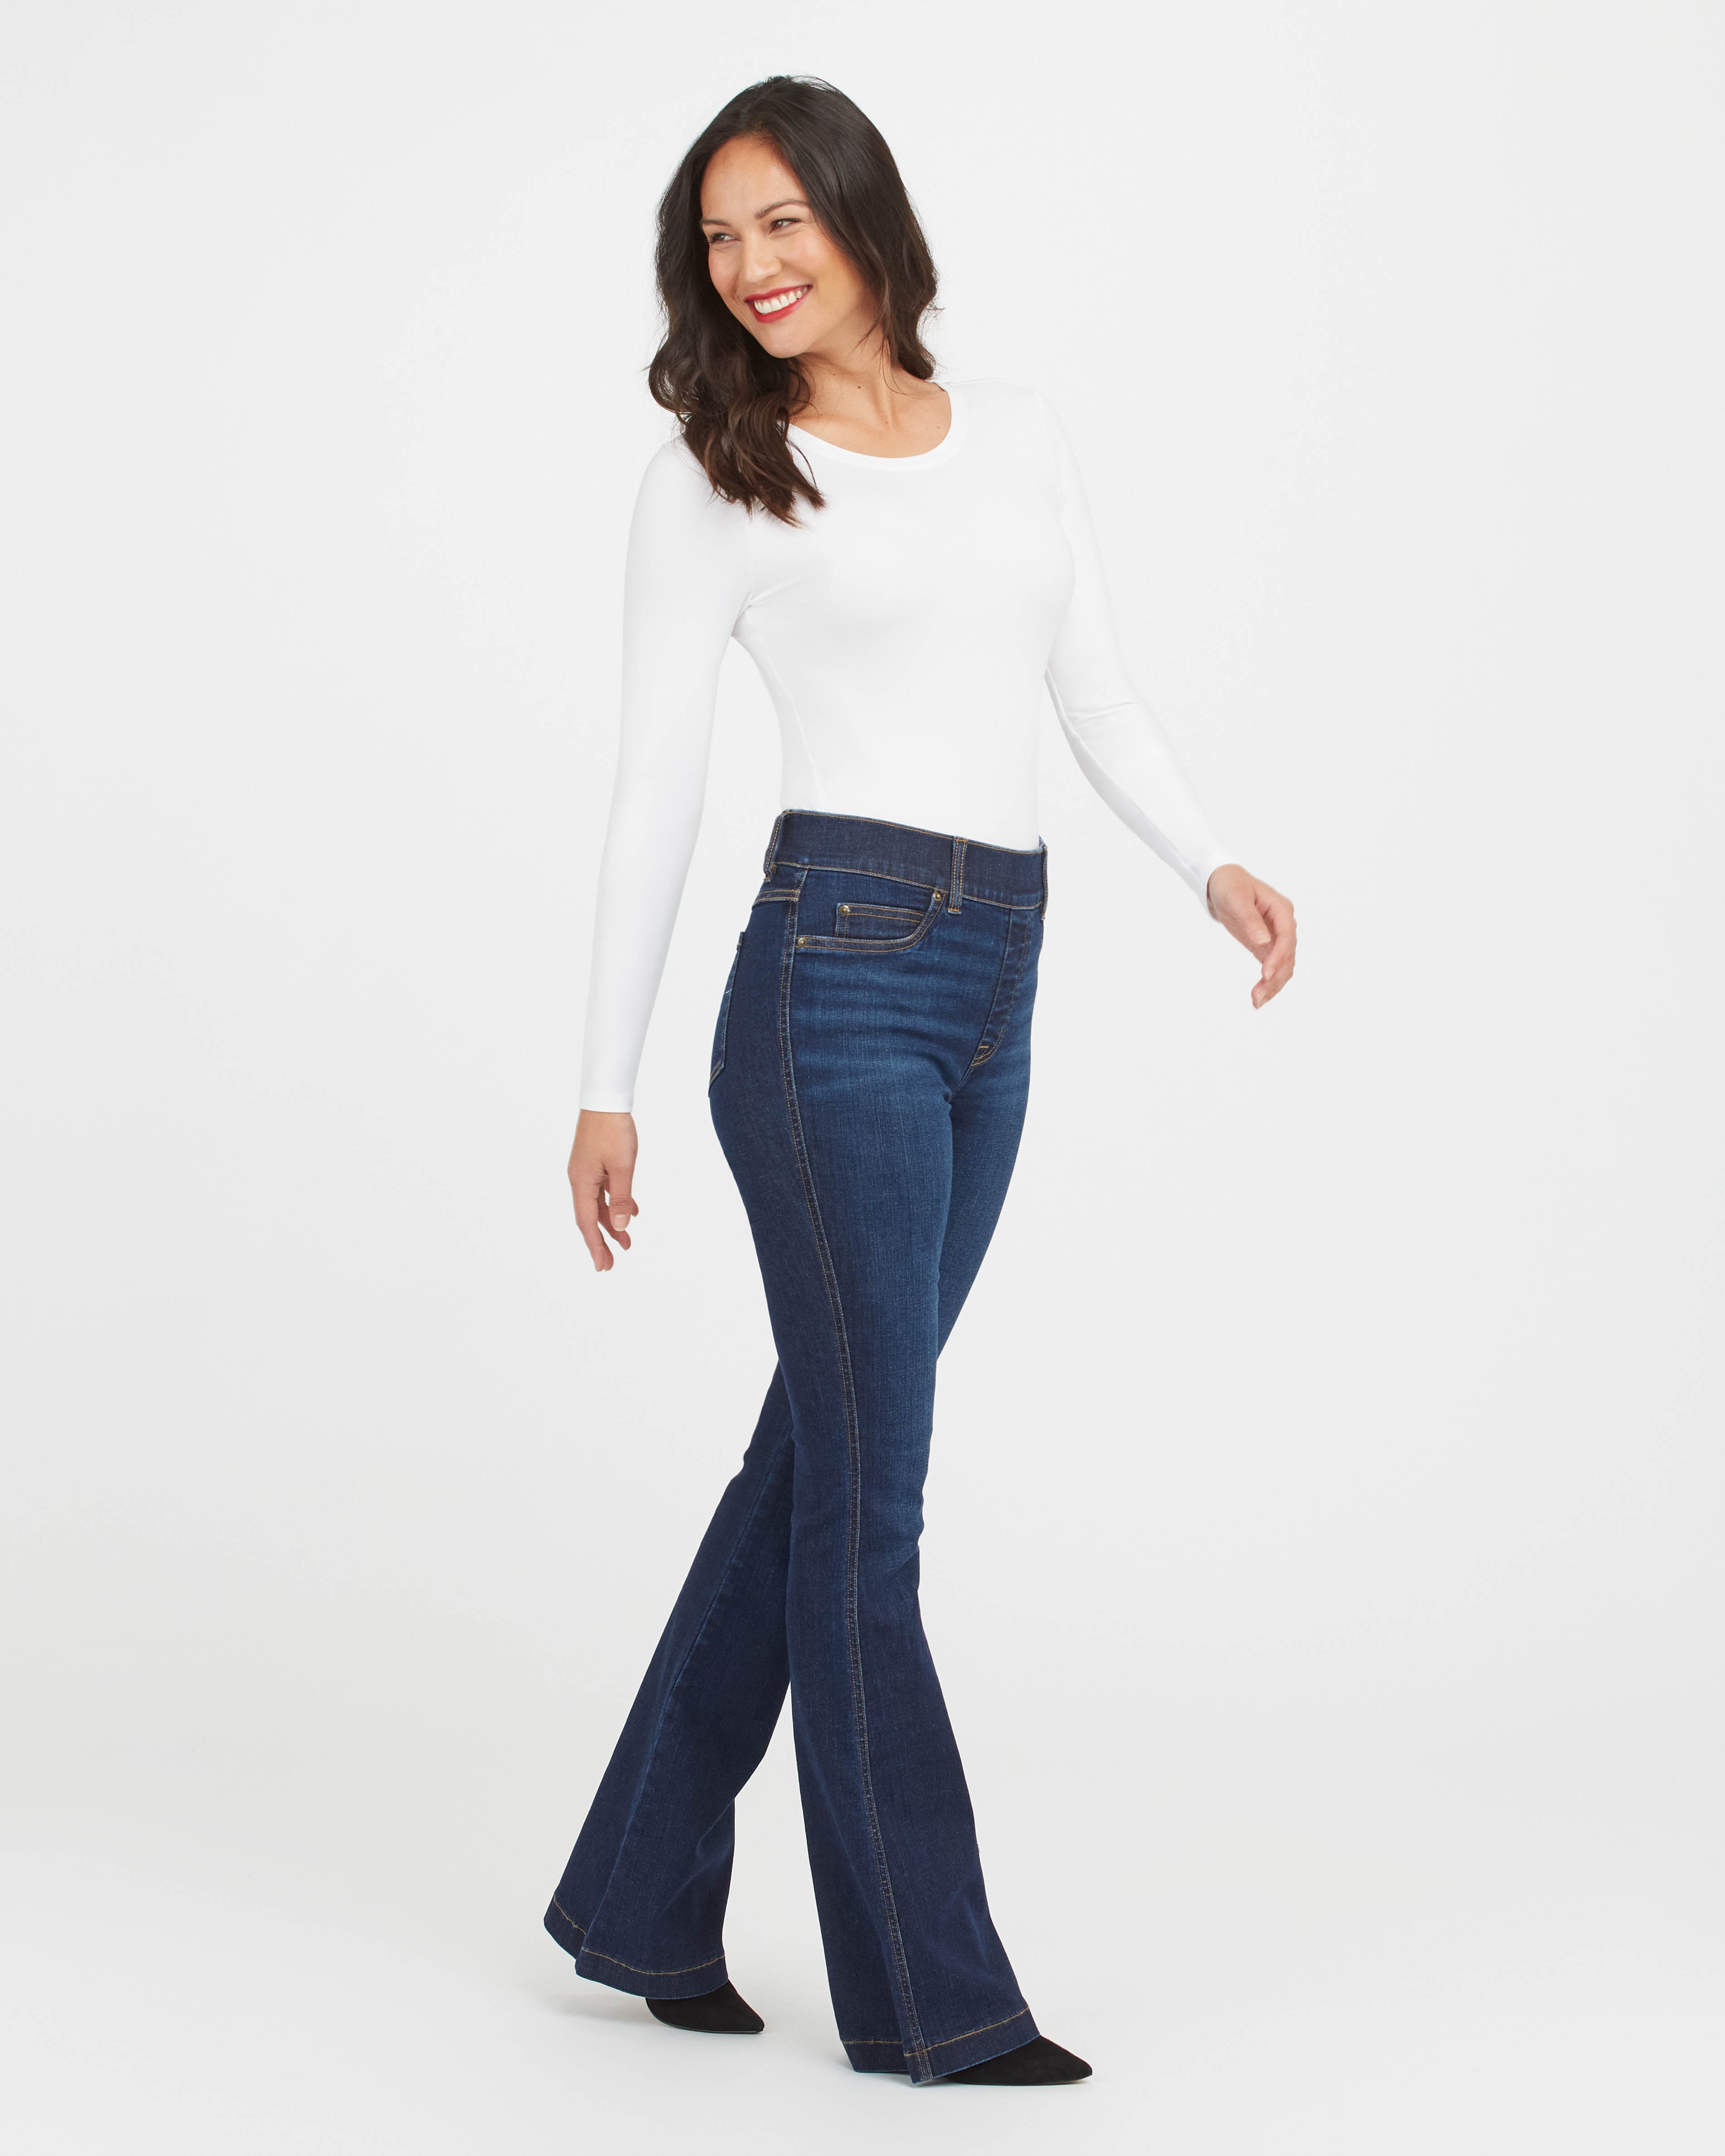 The Suit Yourself Long Sleeve Scoop Neck Bodysuit by Spanx